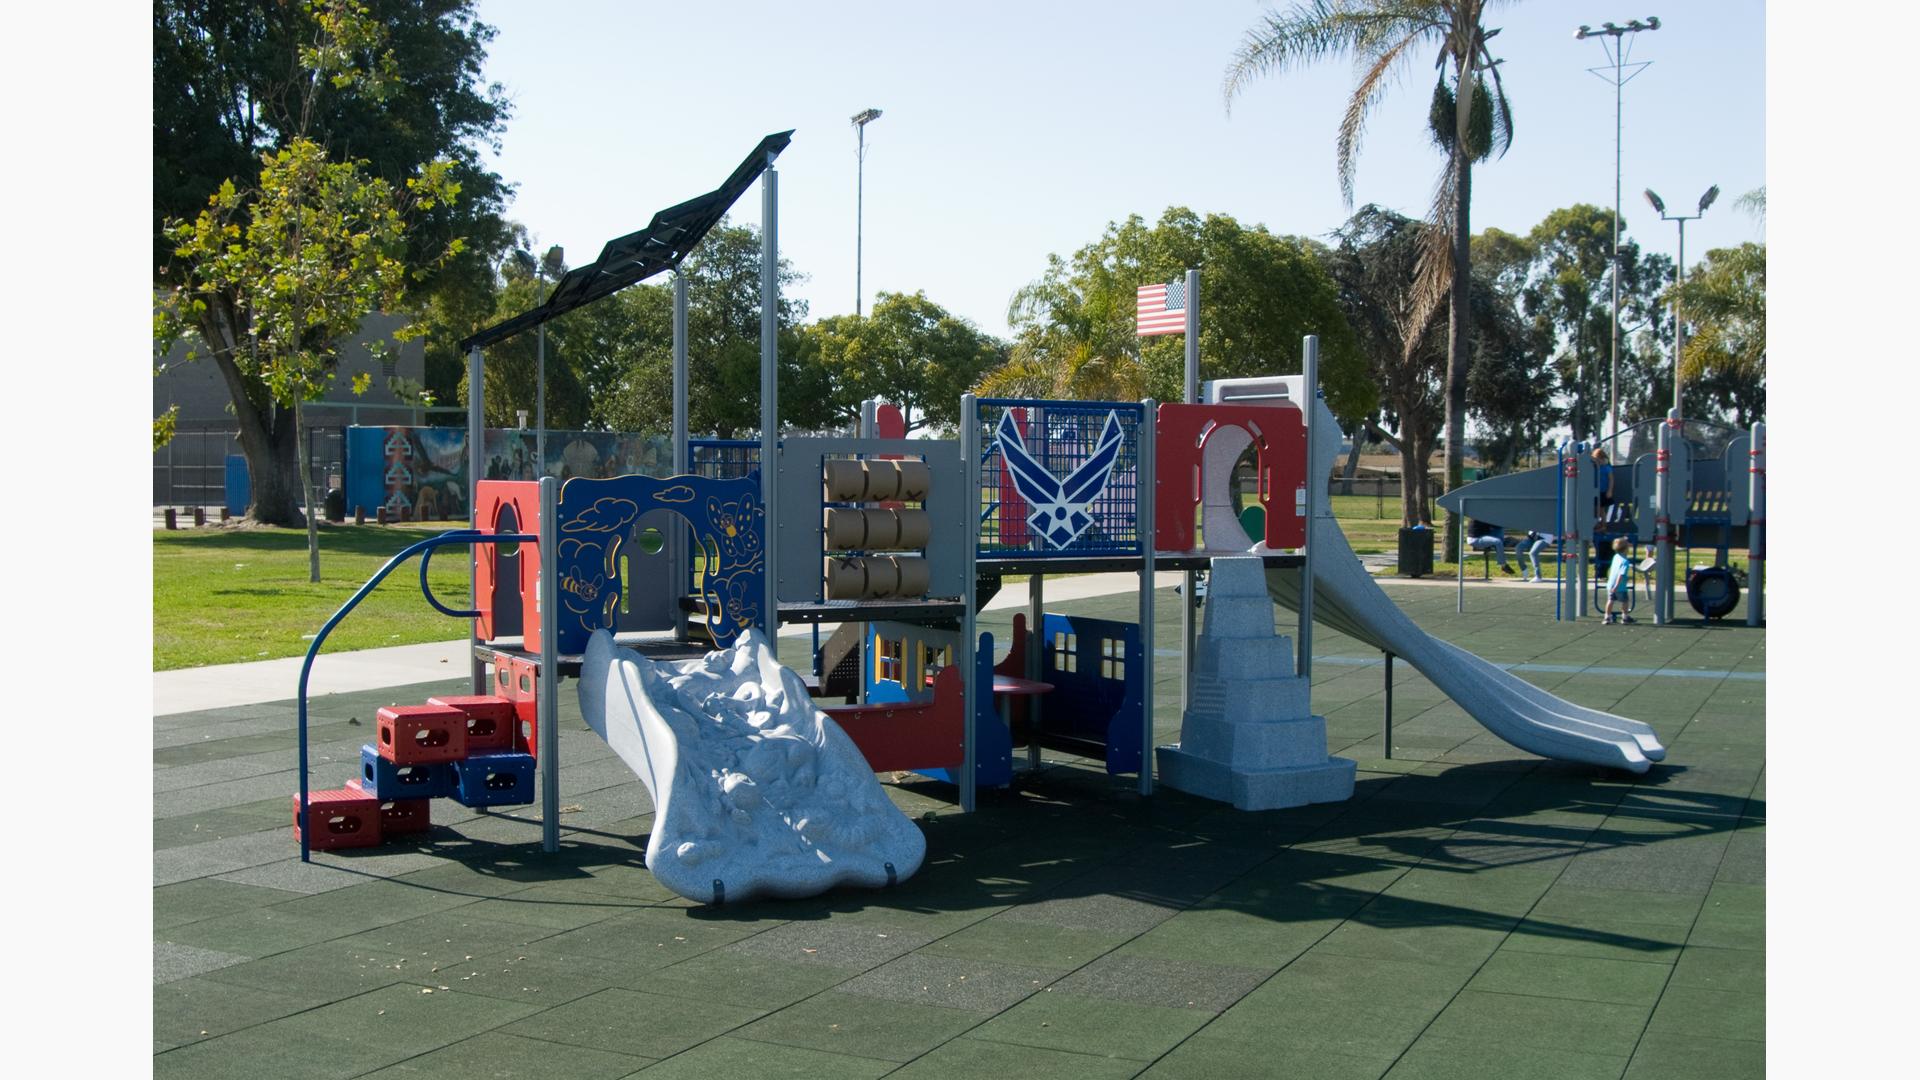 Colonia Park Playshaper play structure